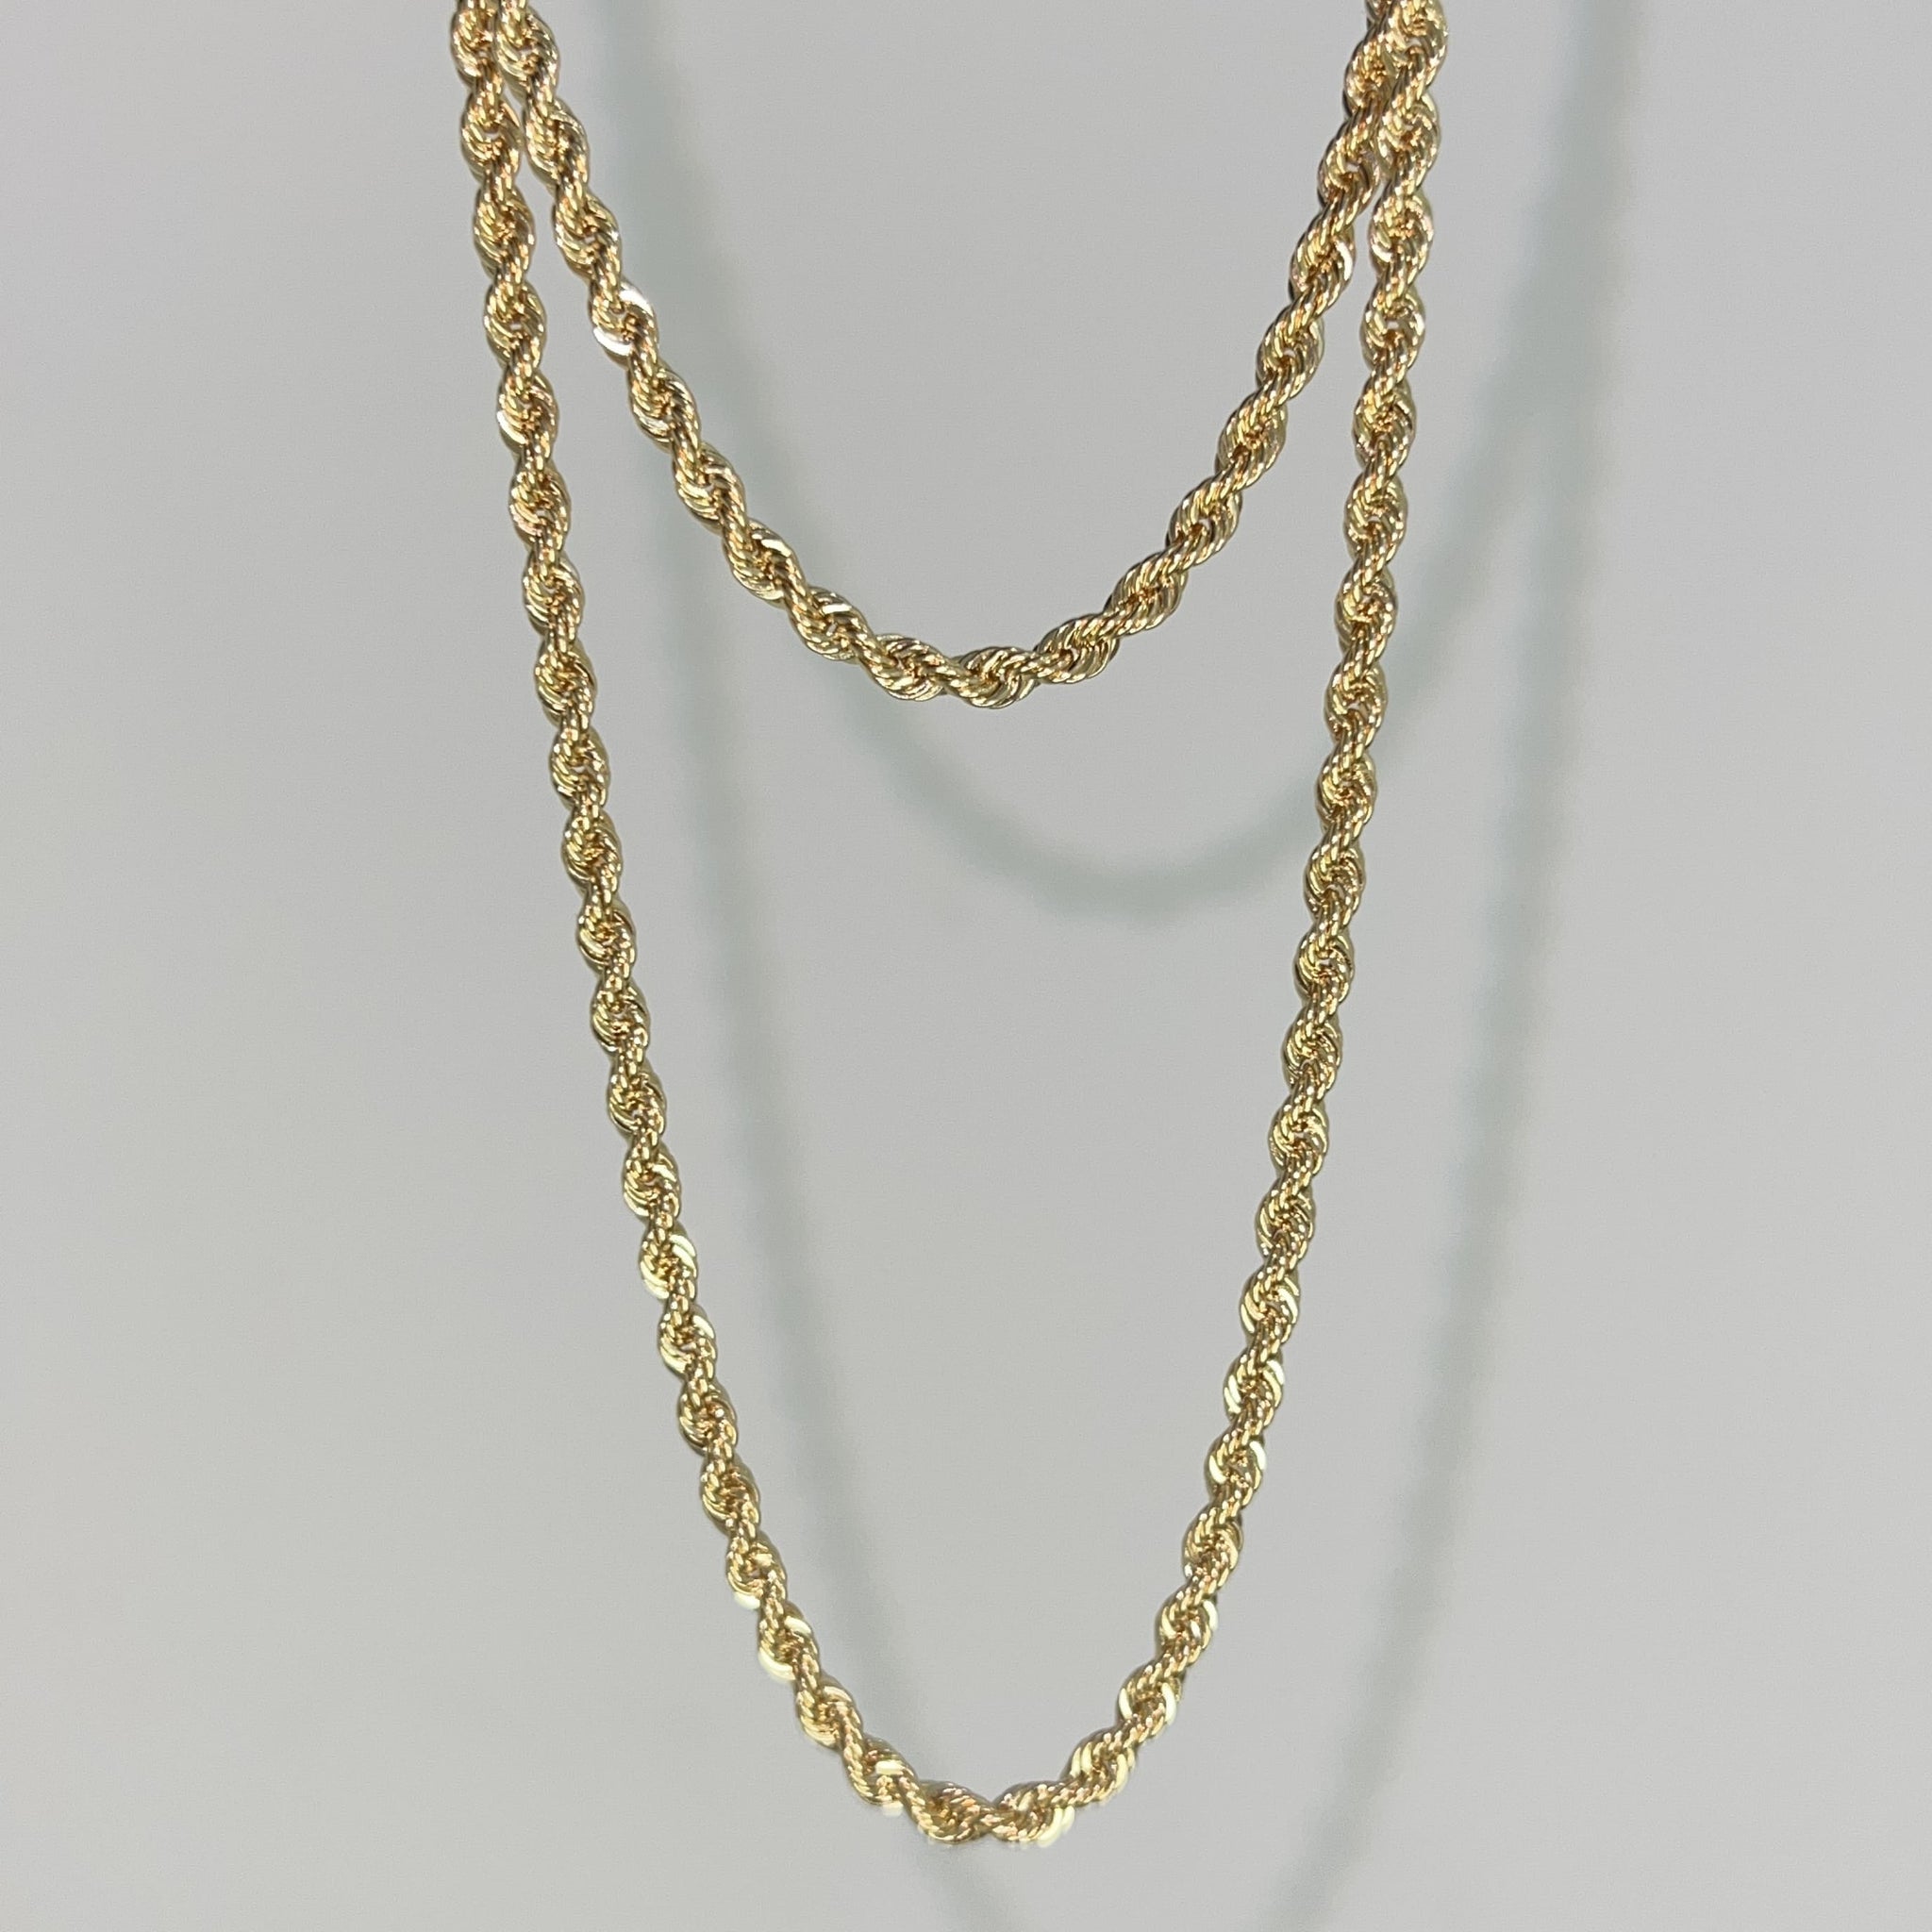 Rope Chain - 18 carat gold - 3.8mm / 60cm